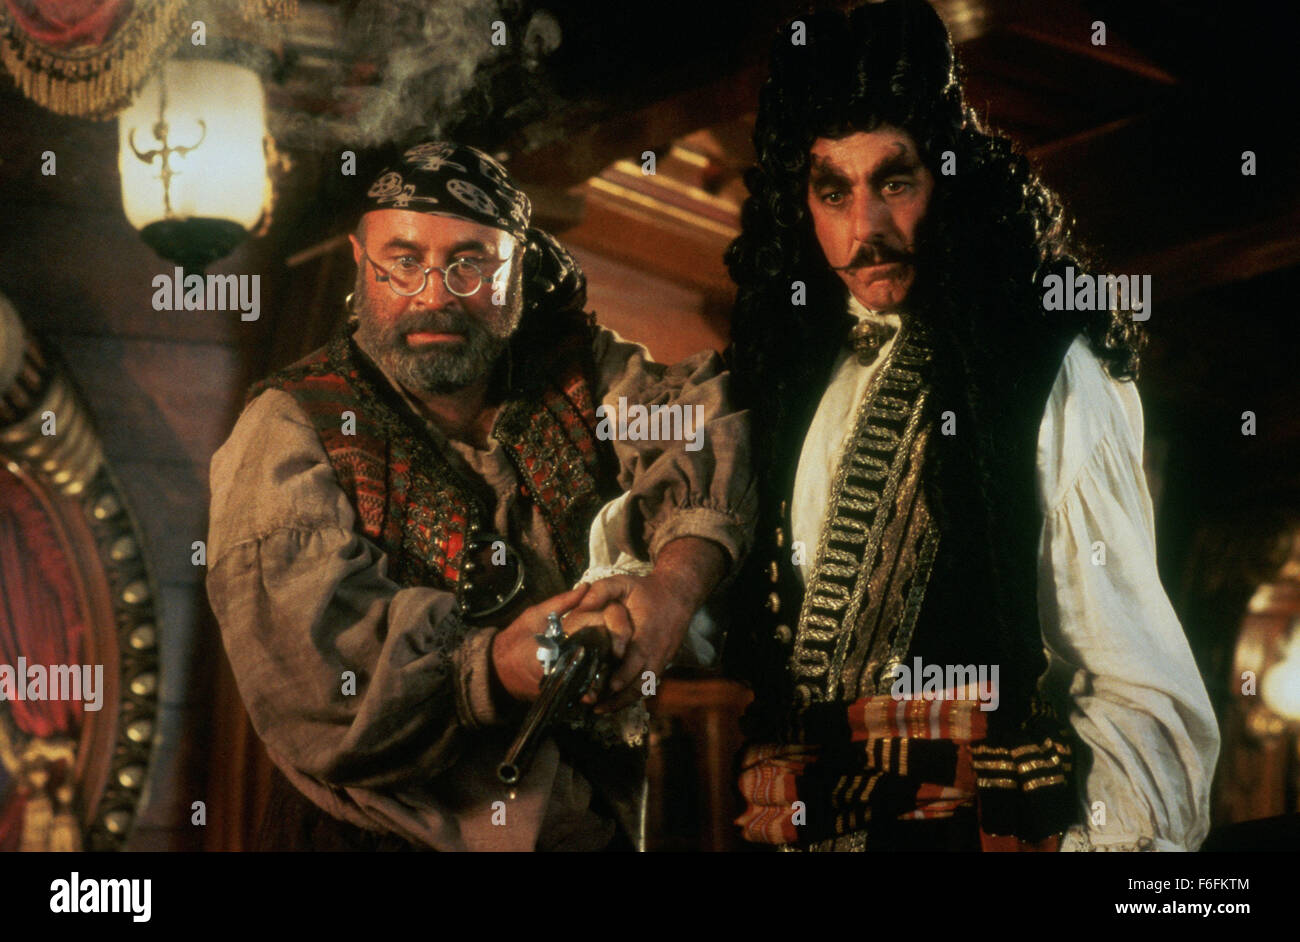 RELEASE DATE: 11 December 1991. MOVIE TITLE: Hook - STUDIO: TriStar Pictures. PLOT: When Capt. Hook kidnaps his children, an adult Peter Pan must return to Neverland and reclaim his youthful spirit in order to challenge his old enemy. PICTURED: BOB HOSKINS as Smee and DUSTIN HOFFMAN as Capt. Hook. Stock Photo